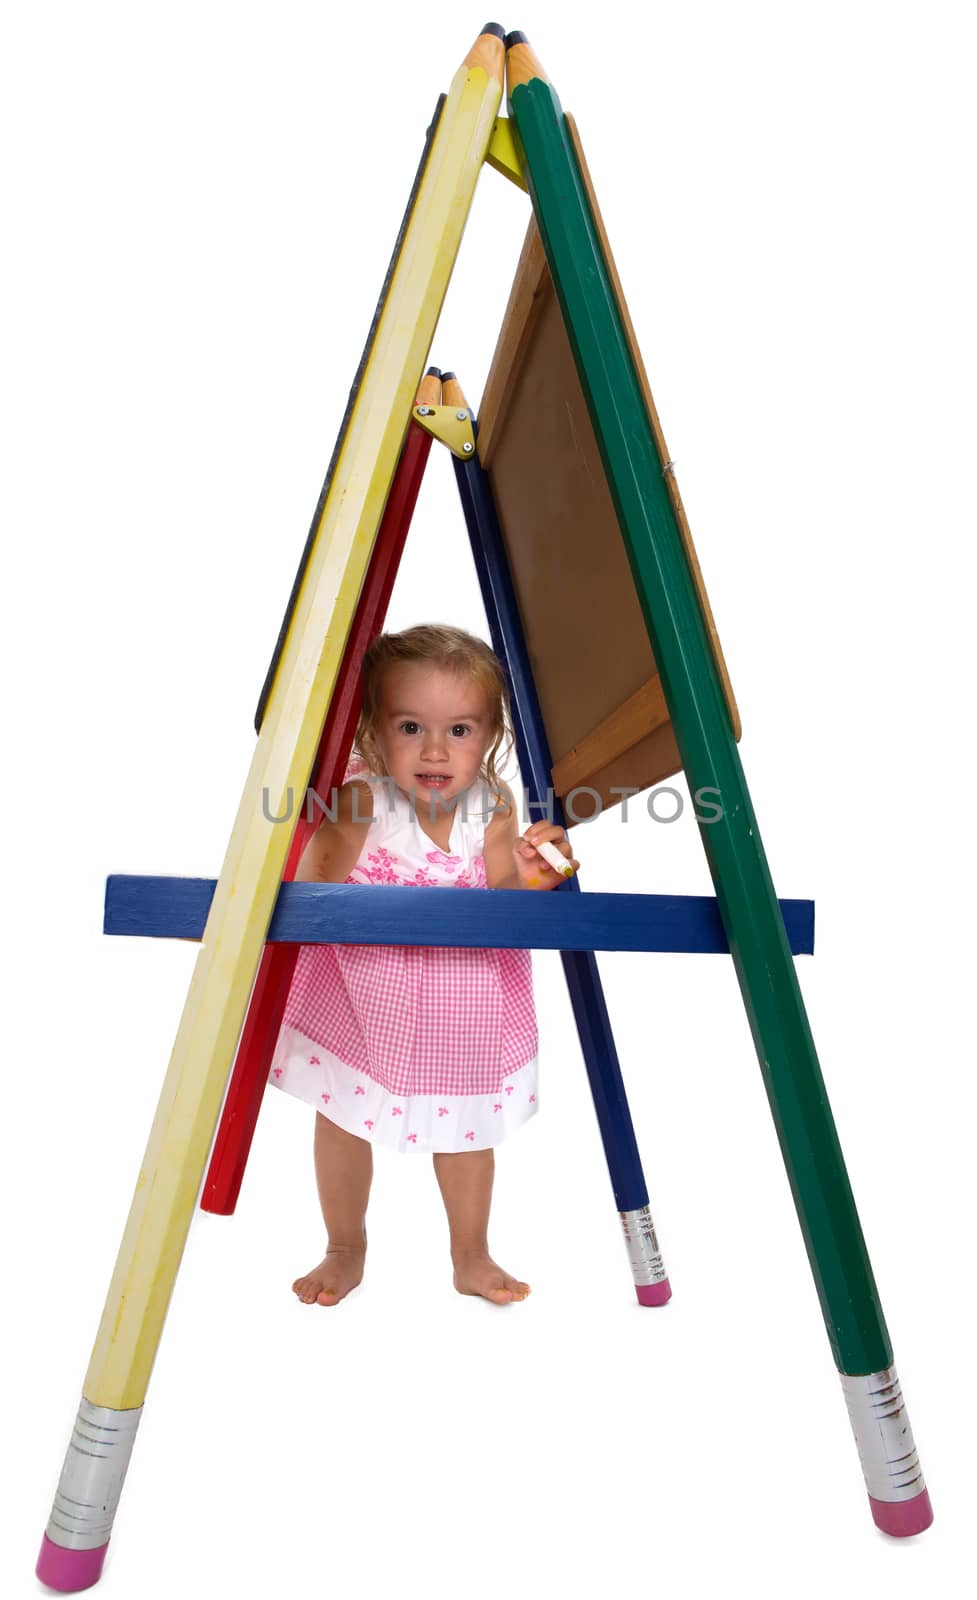 Cute little girl playing on an A-frame by coskun